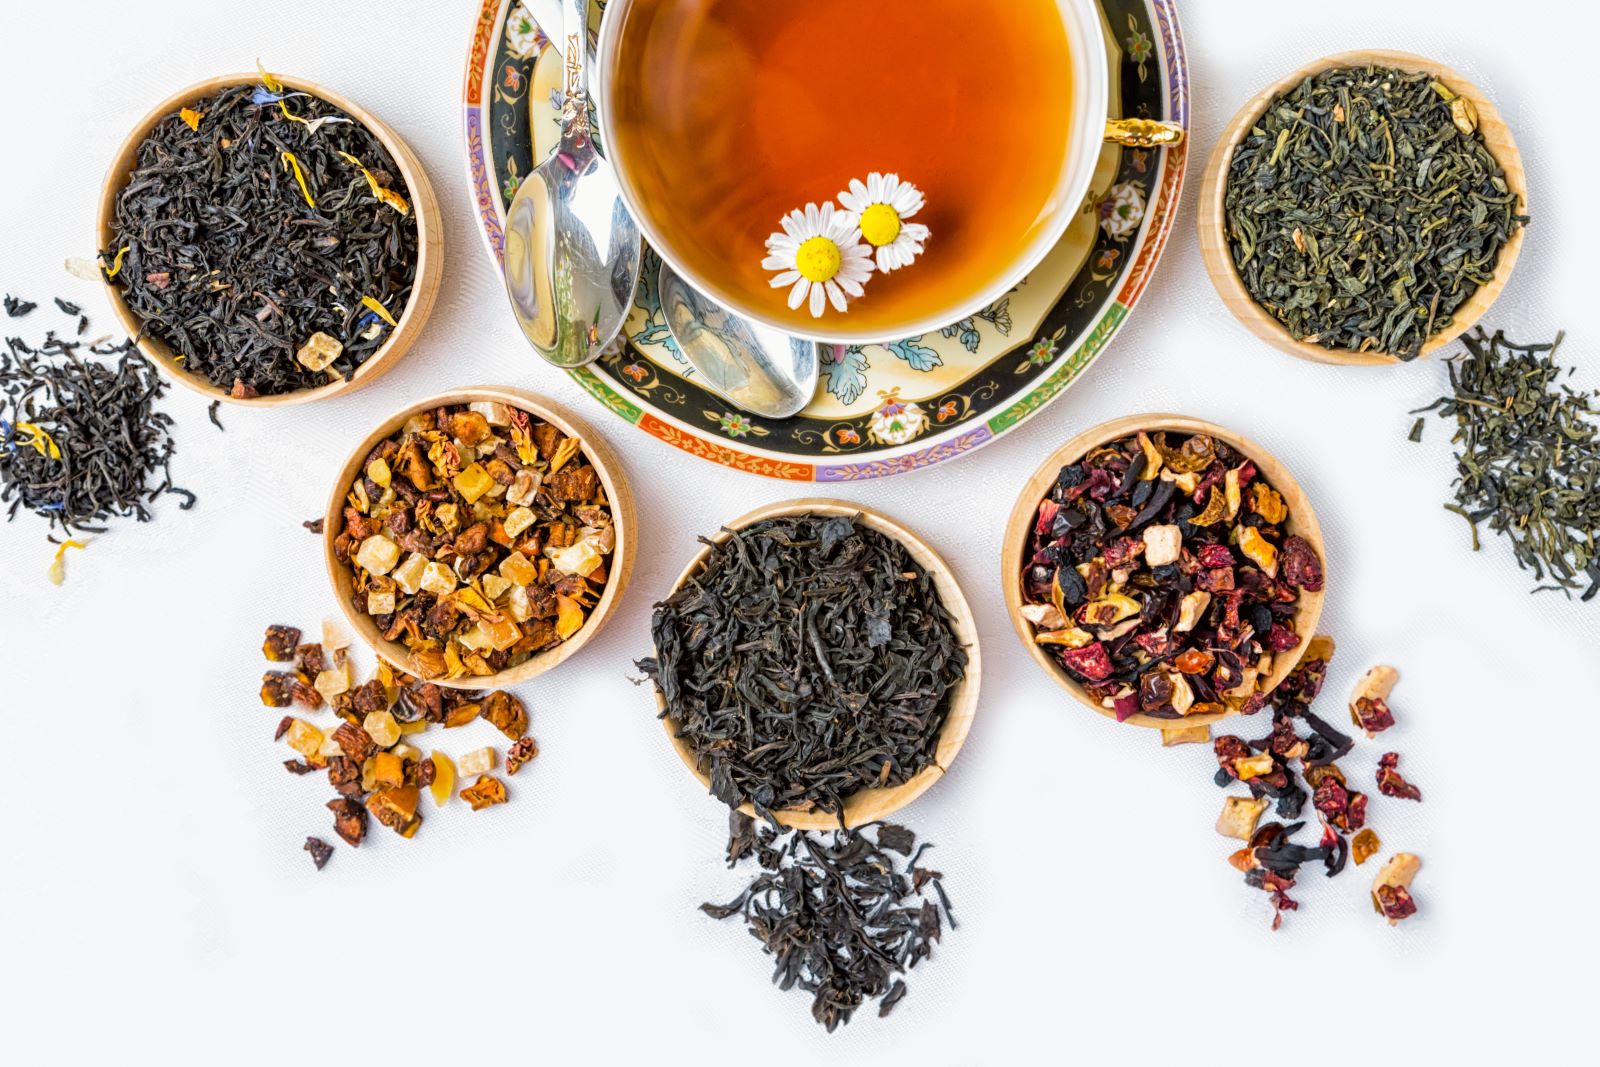 Image Credit: Shutterstock / liliya Vantsura <p>Not all teas are healthy and some might actually harm your health with poor ingredients. But how can you tell the good from the bad? This guide aims to help you make informed choices without turning you into a tea expert overnight. <strong><a href="https://www.msn.com/en-us/health/other/not-all-tea-is-good-for-you-list-of-teas-to-avoid-and-to-stick-to/ss-AA1o85Pt">Not All Tea Is Good for You: List of Teas to Avoid and to Stick To</a></strong></p>